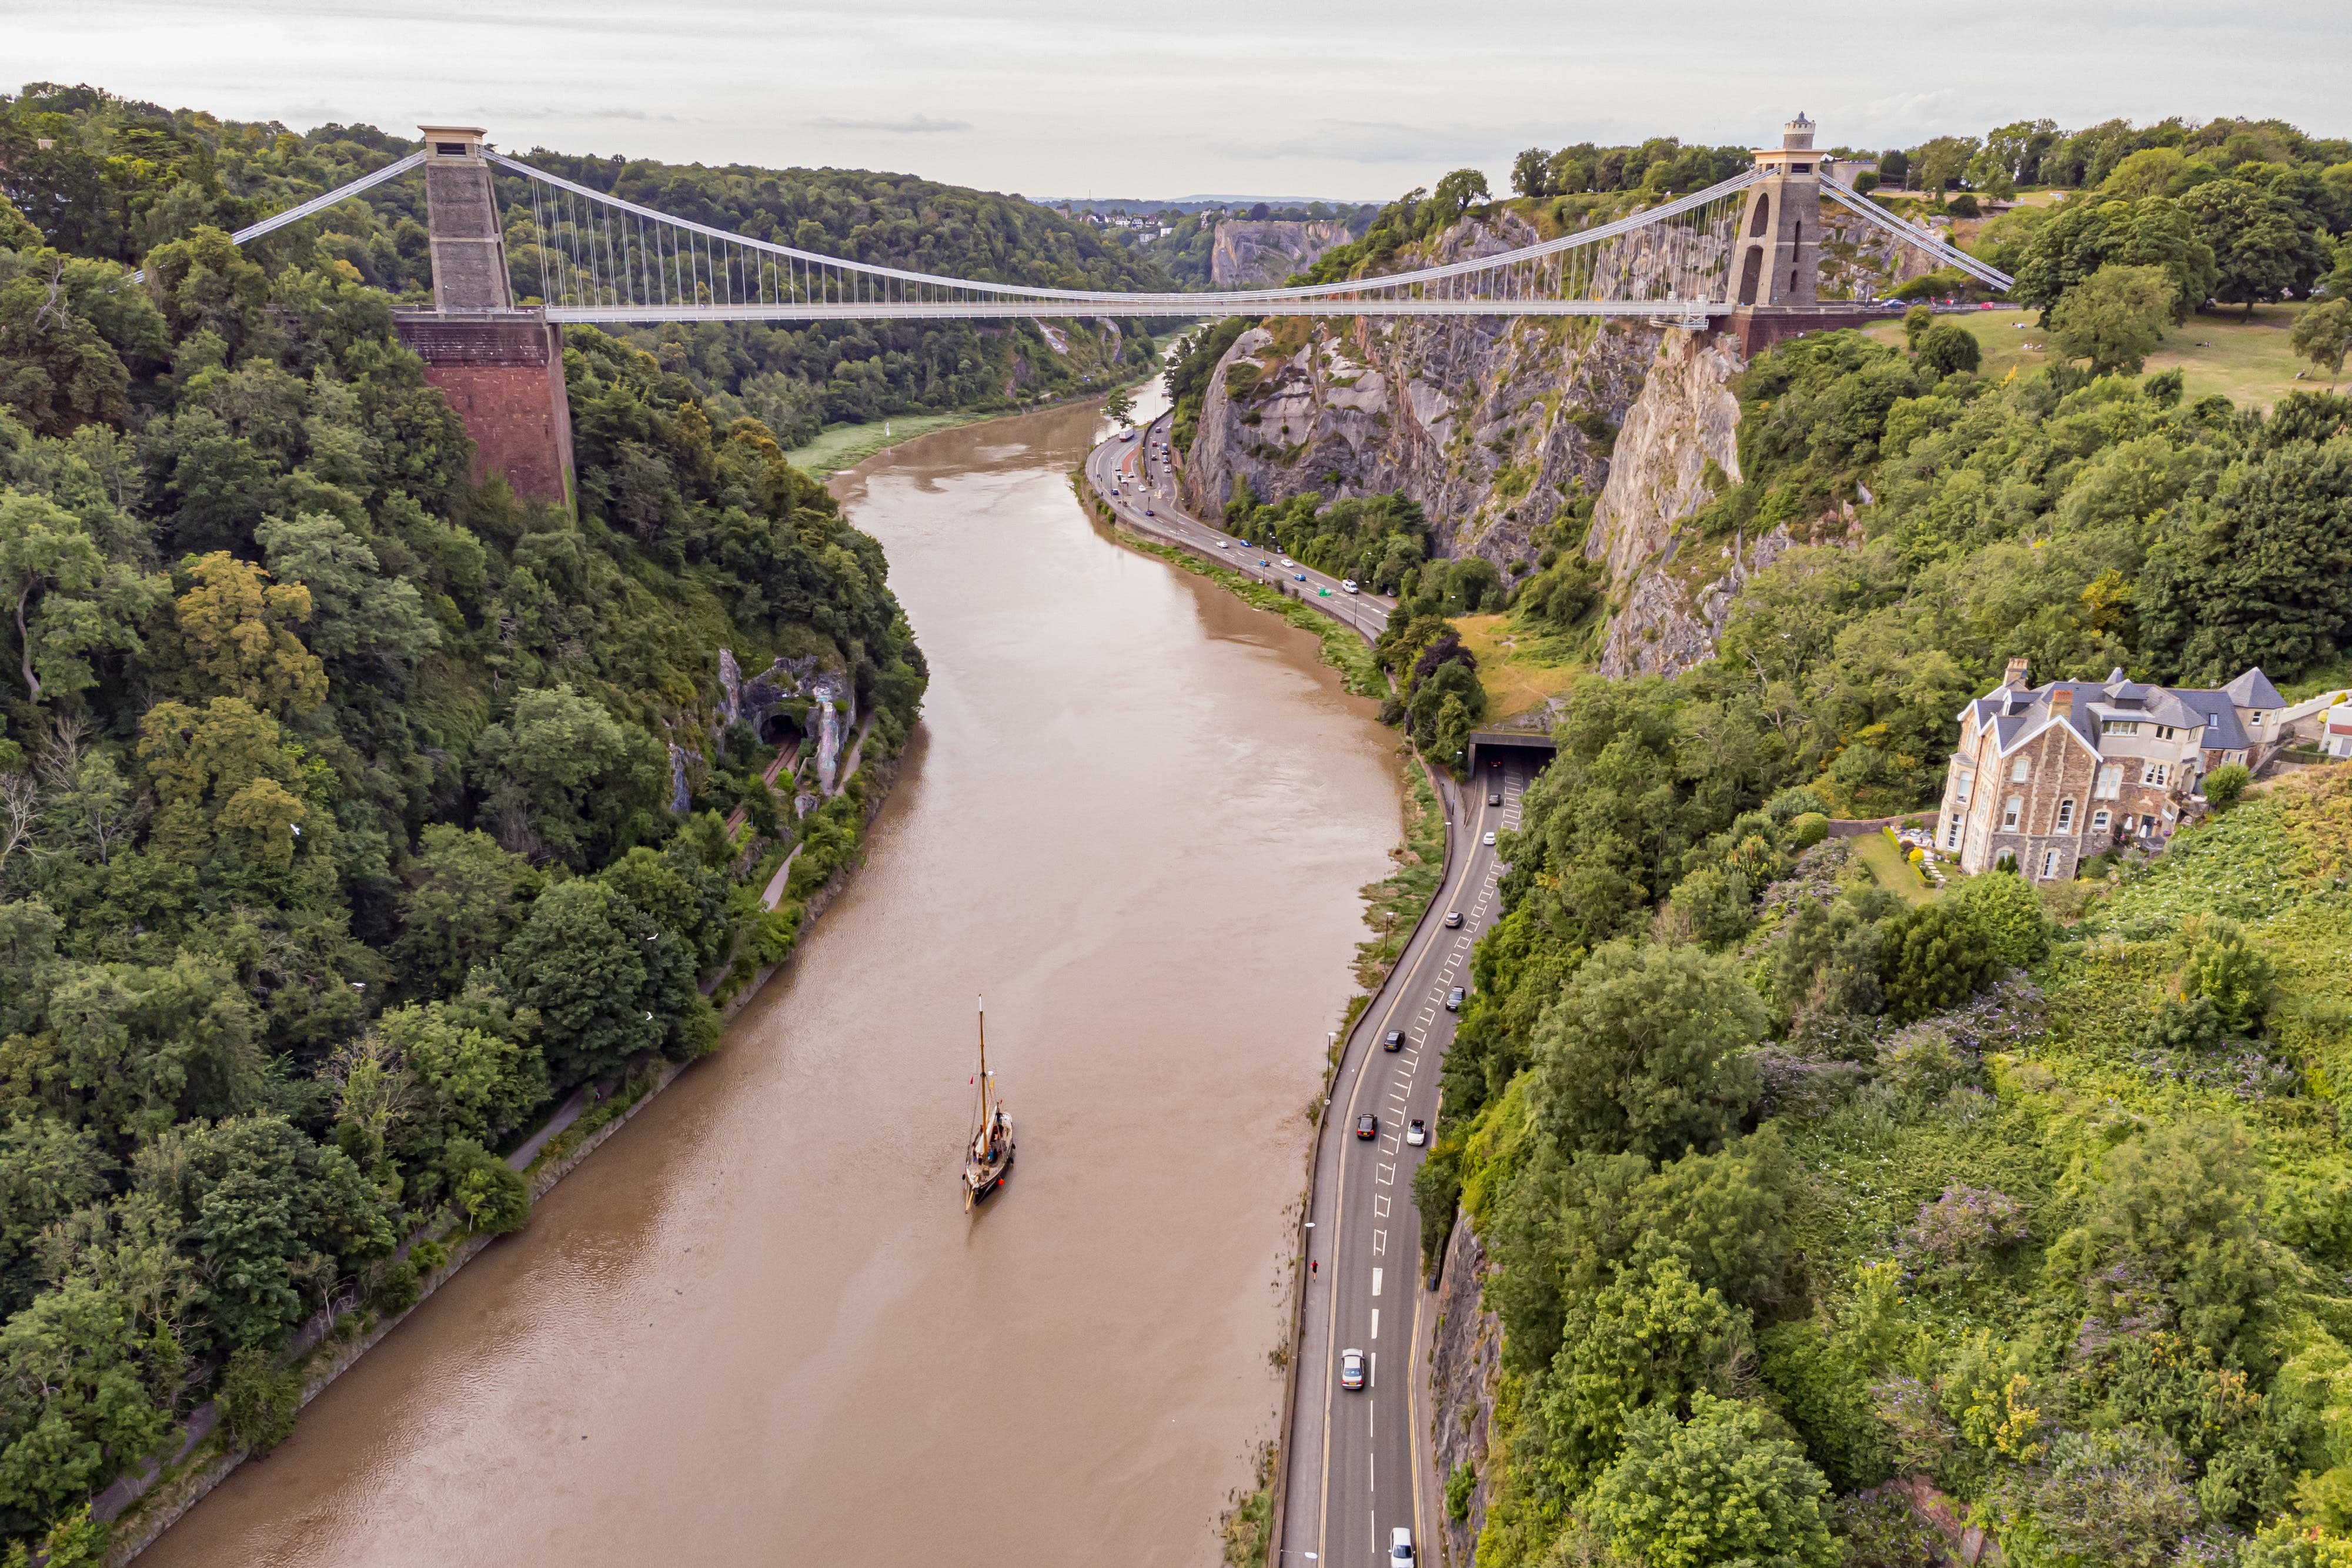 Two suitcases containing human remains were found at Clifton Suspension Bridge in Bristol